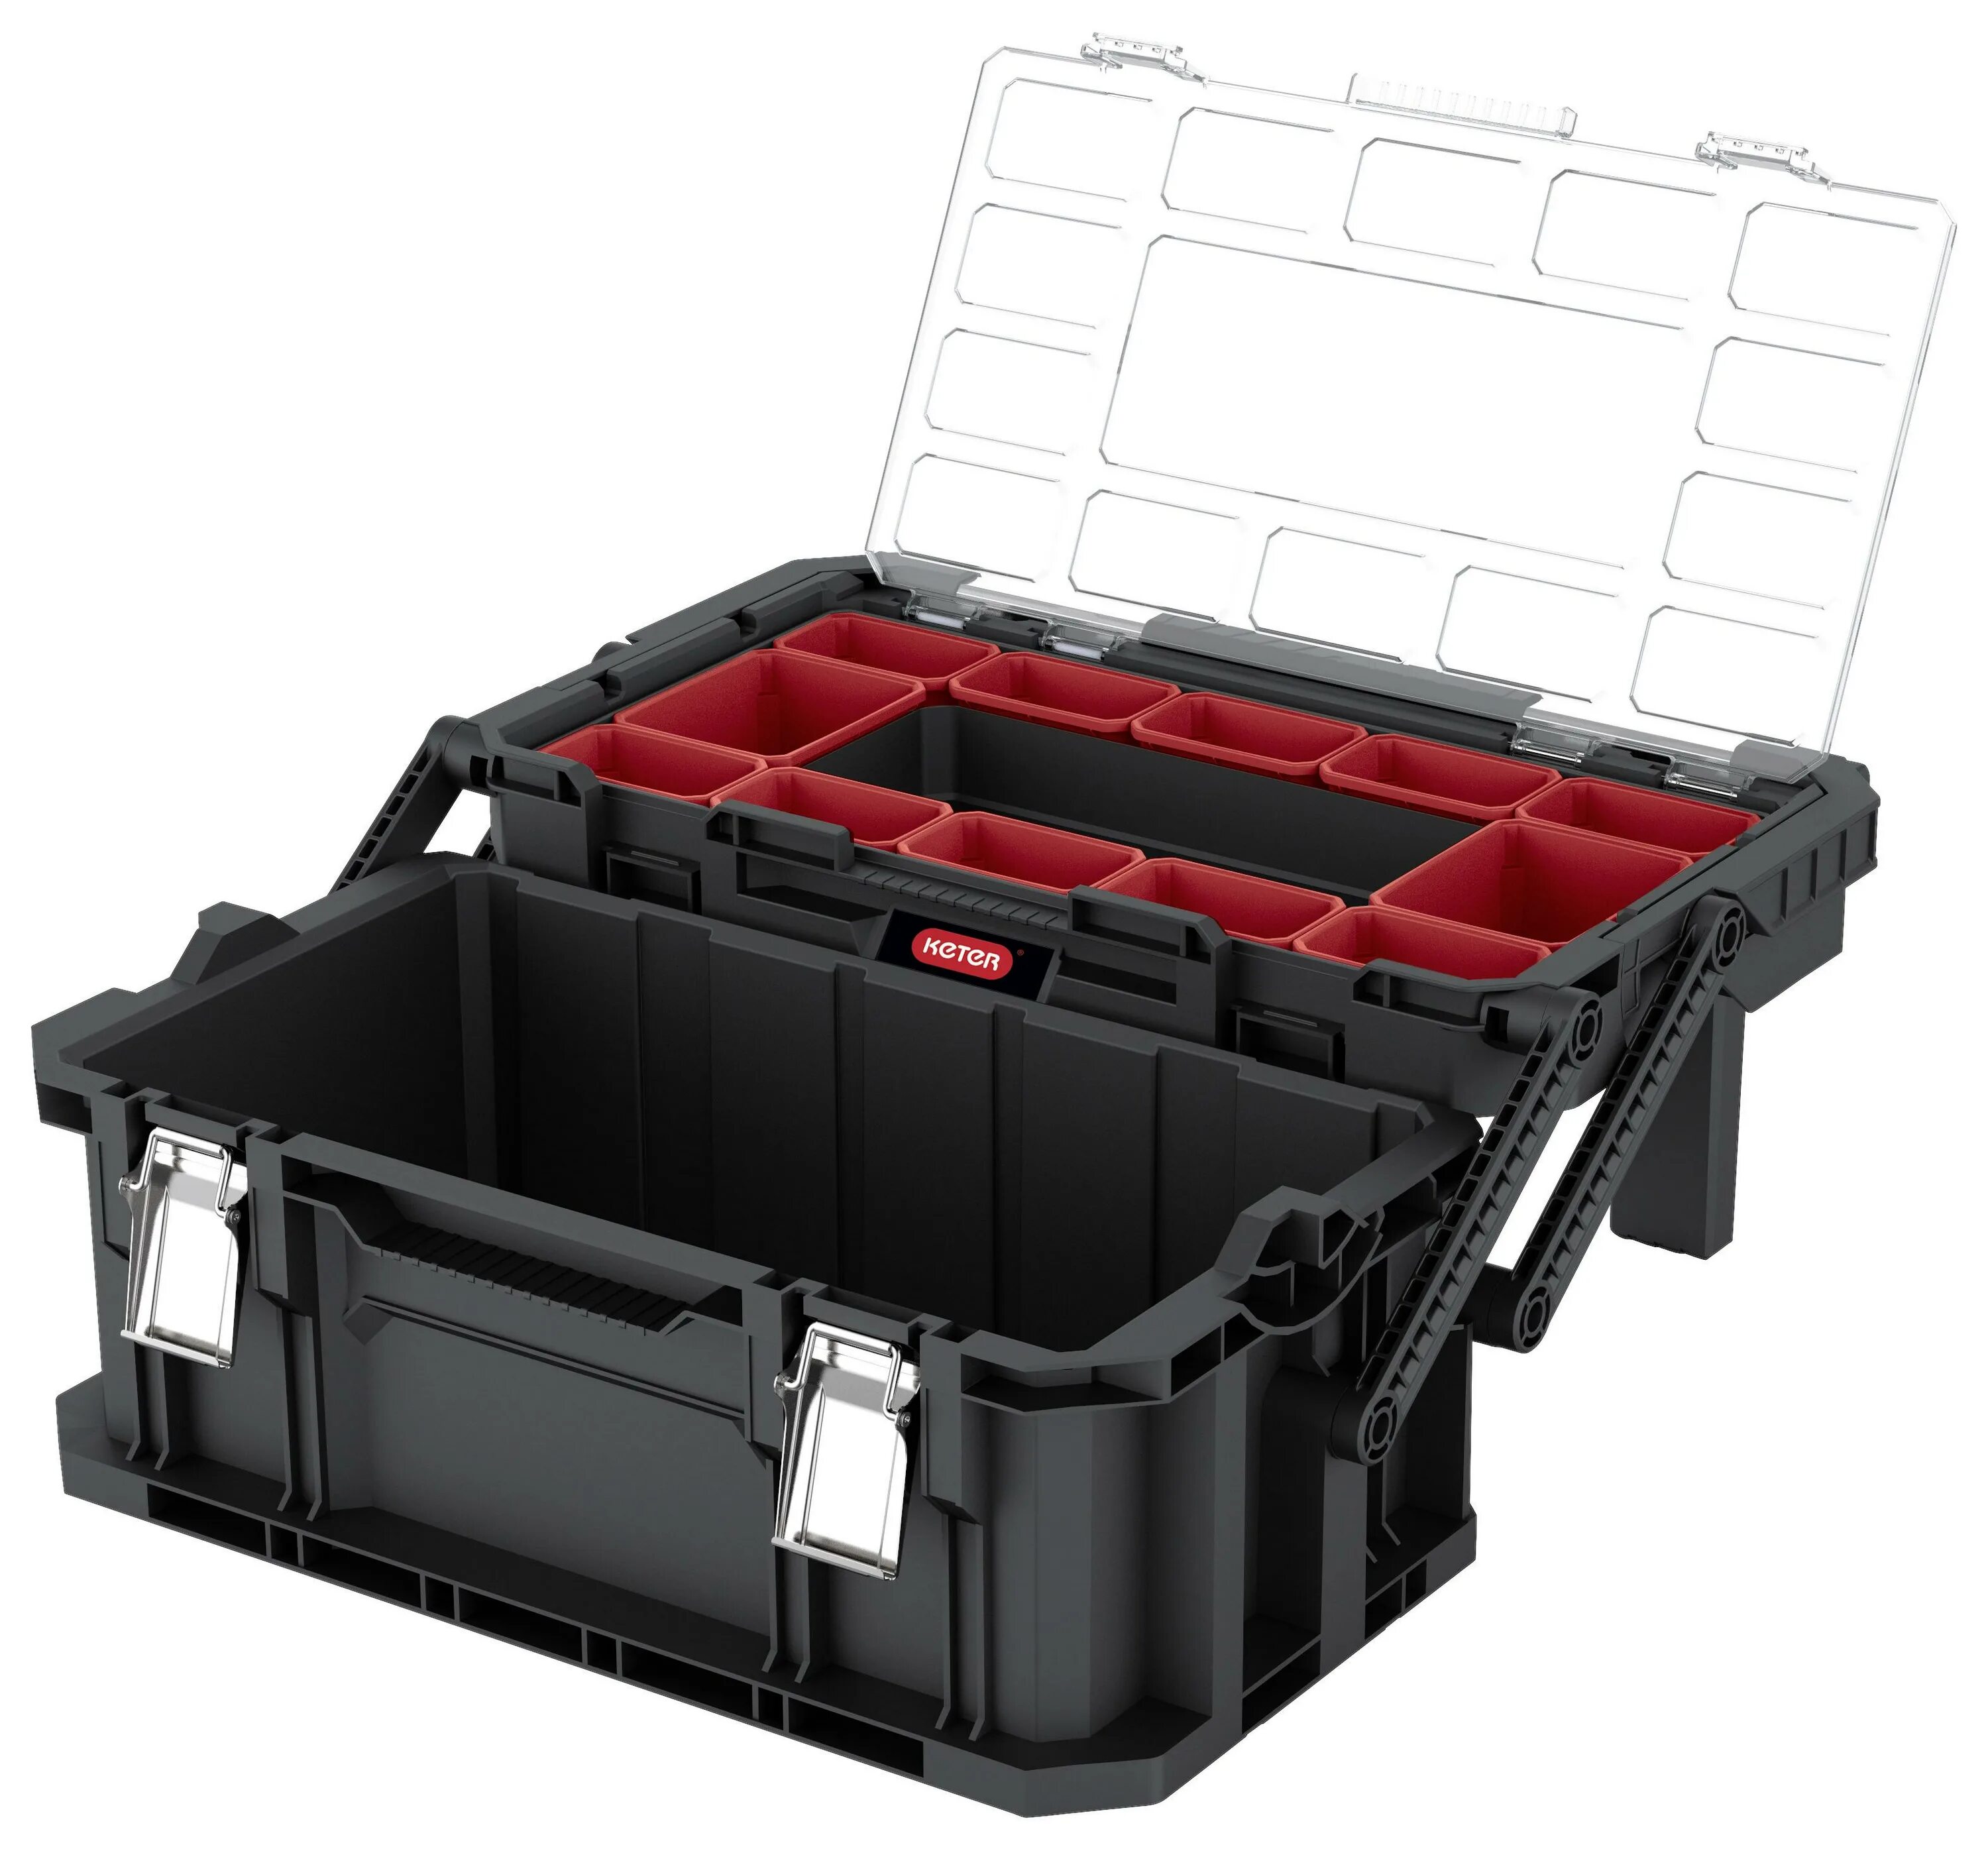 Connect tool. Keter connect Cantilever Tool Box. Keter connect Cantilever Tool Box 17203104. Ящик для инструмента "connect Cantiliver Tool Box" 56,5*31,7*25,1 см (черный) "Keter". Keter connect 250037.